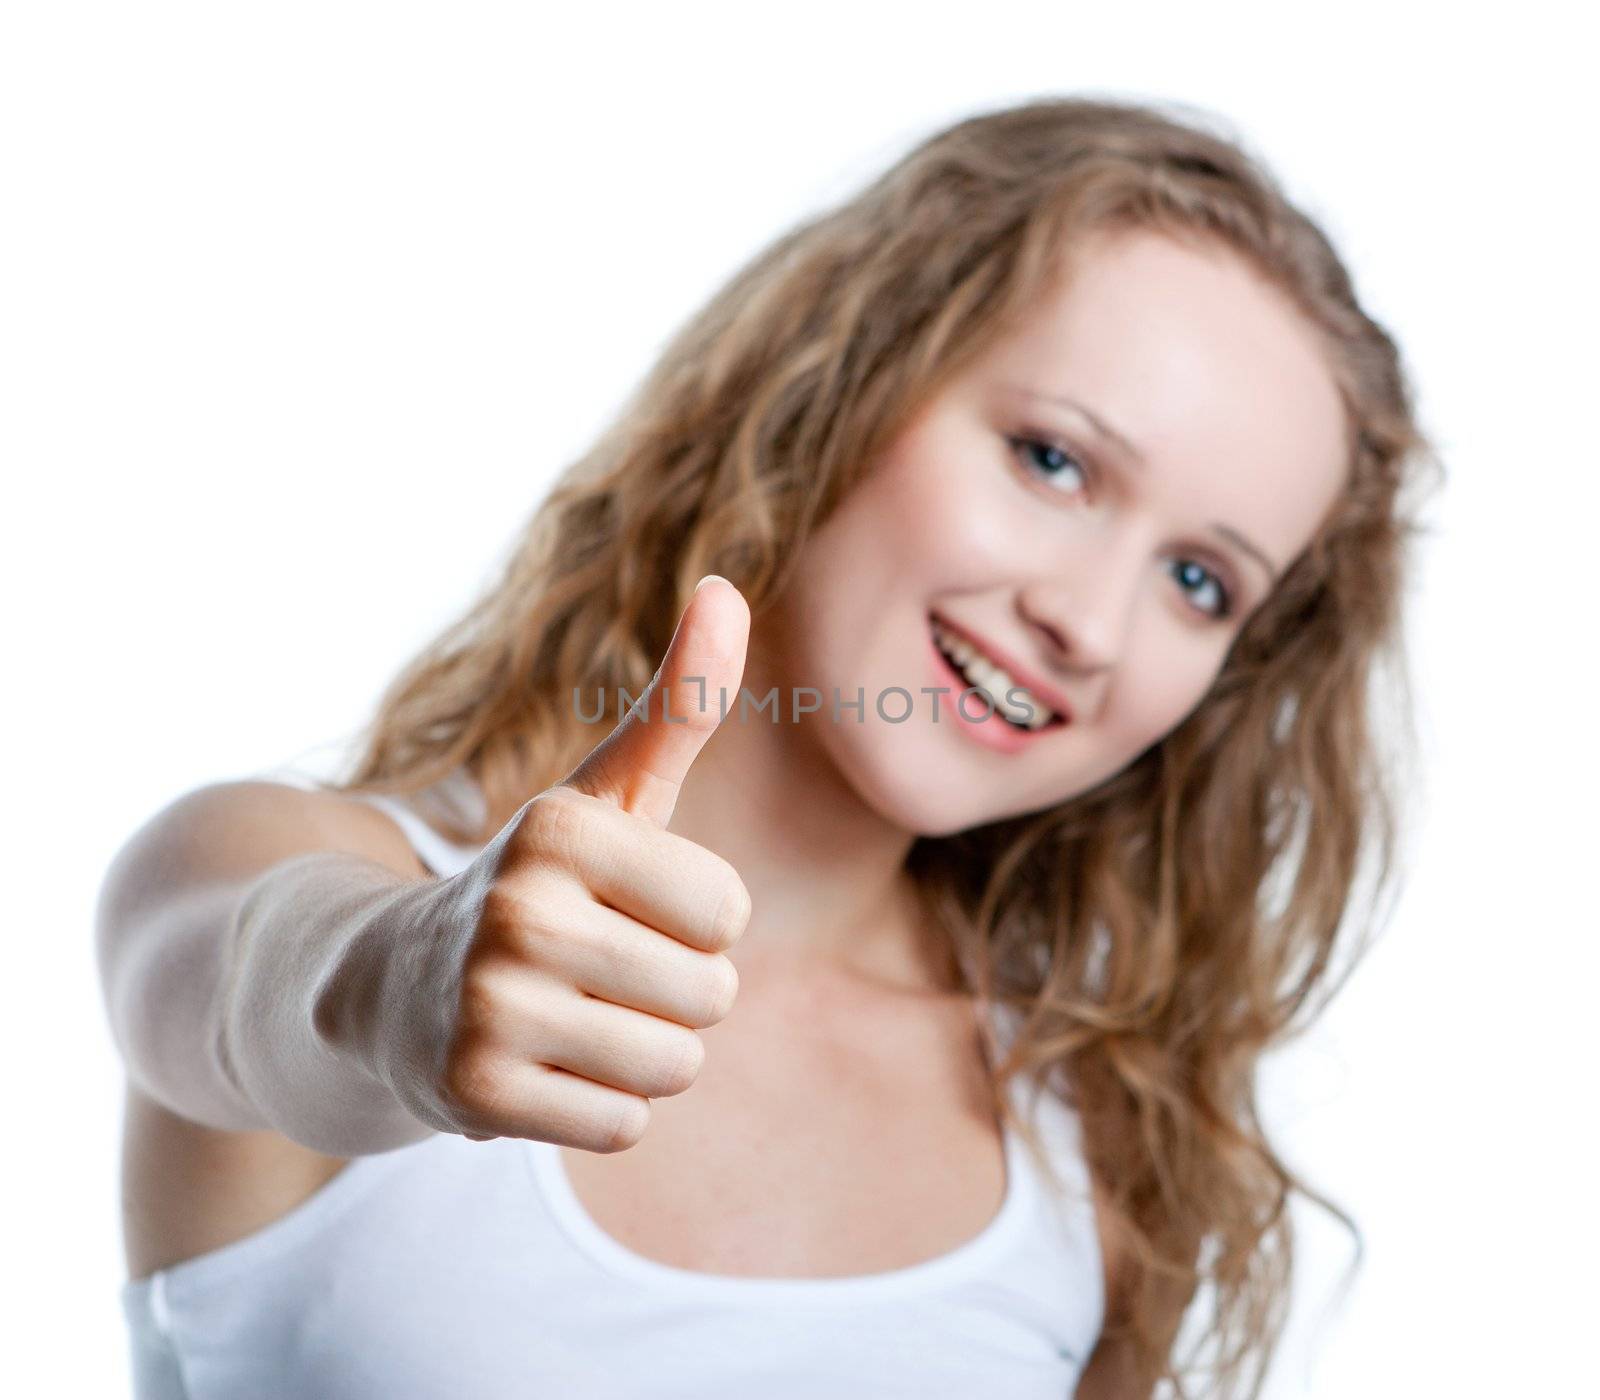 girl shows her finger up isolated on white background.